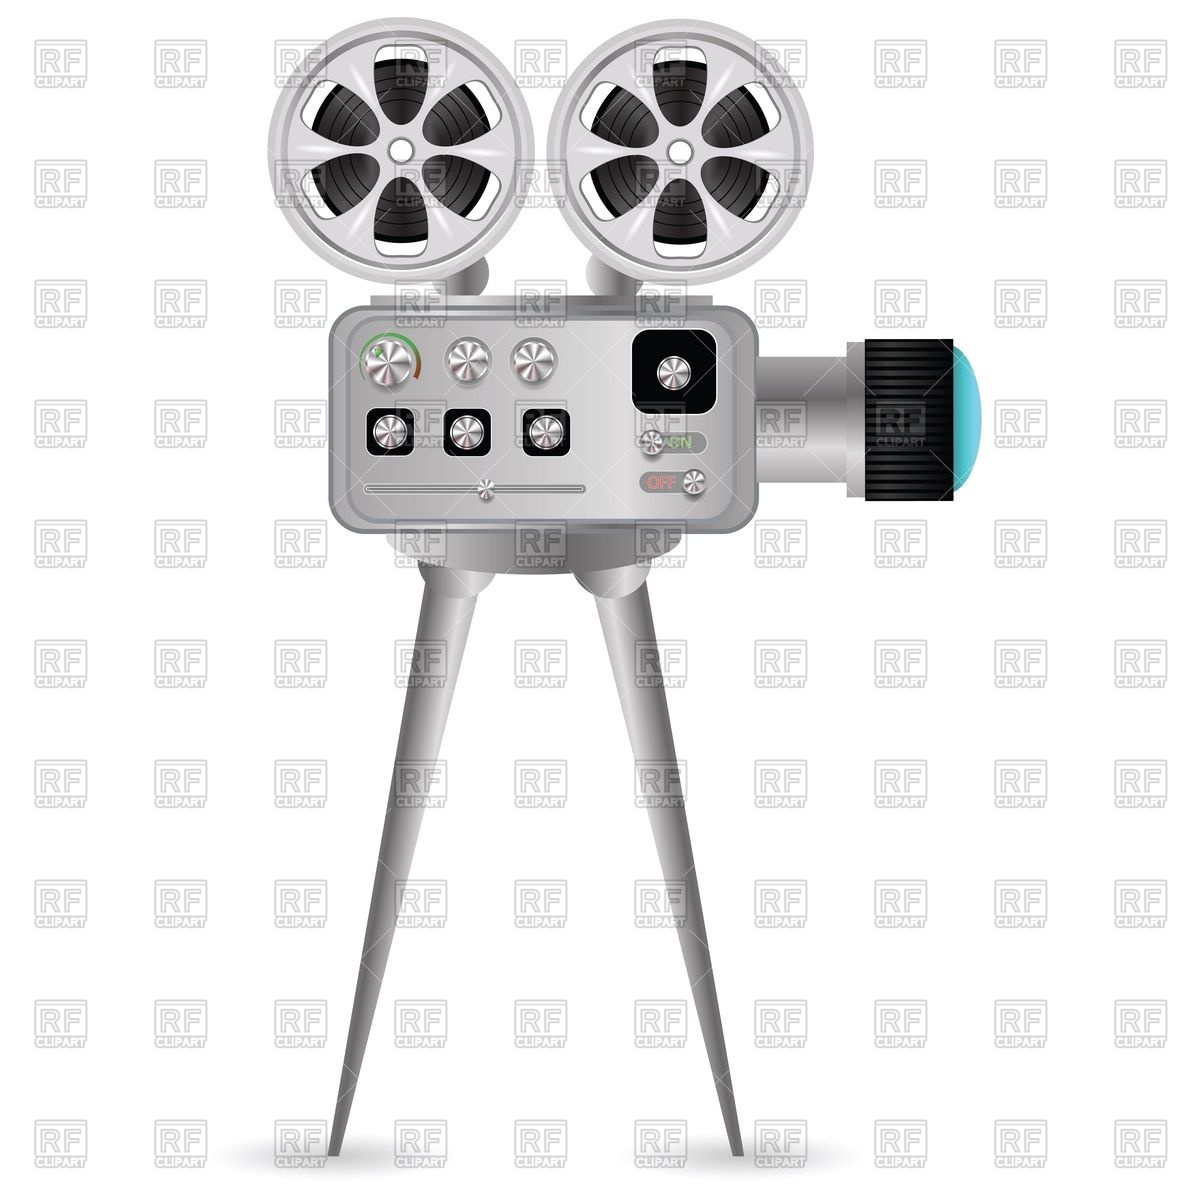 Movie Projector With Film Reel 54802 Download Royalty Free Vector